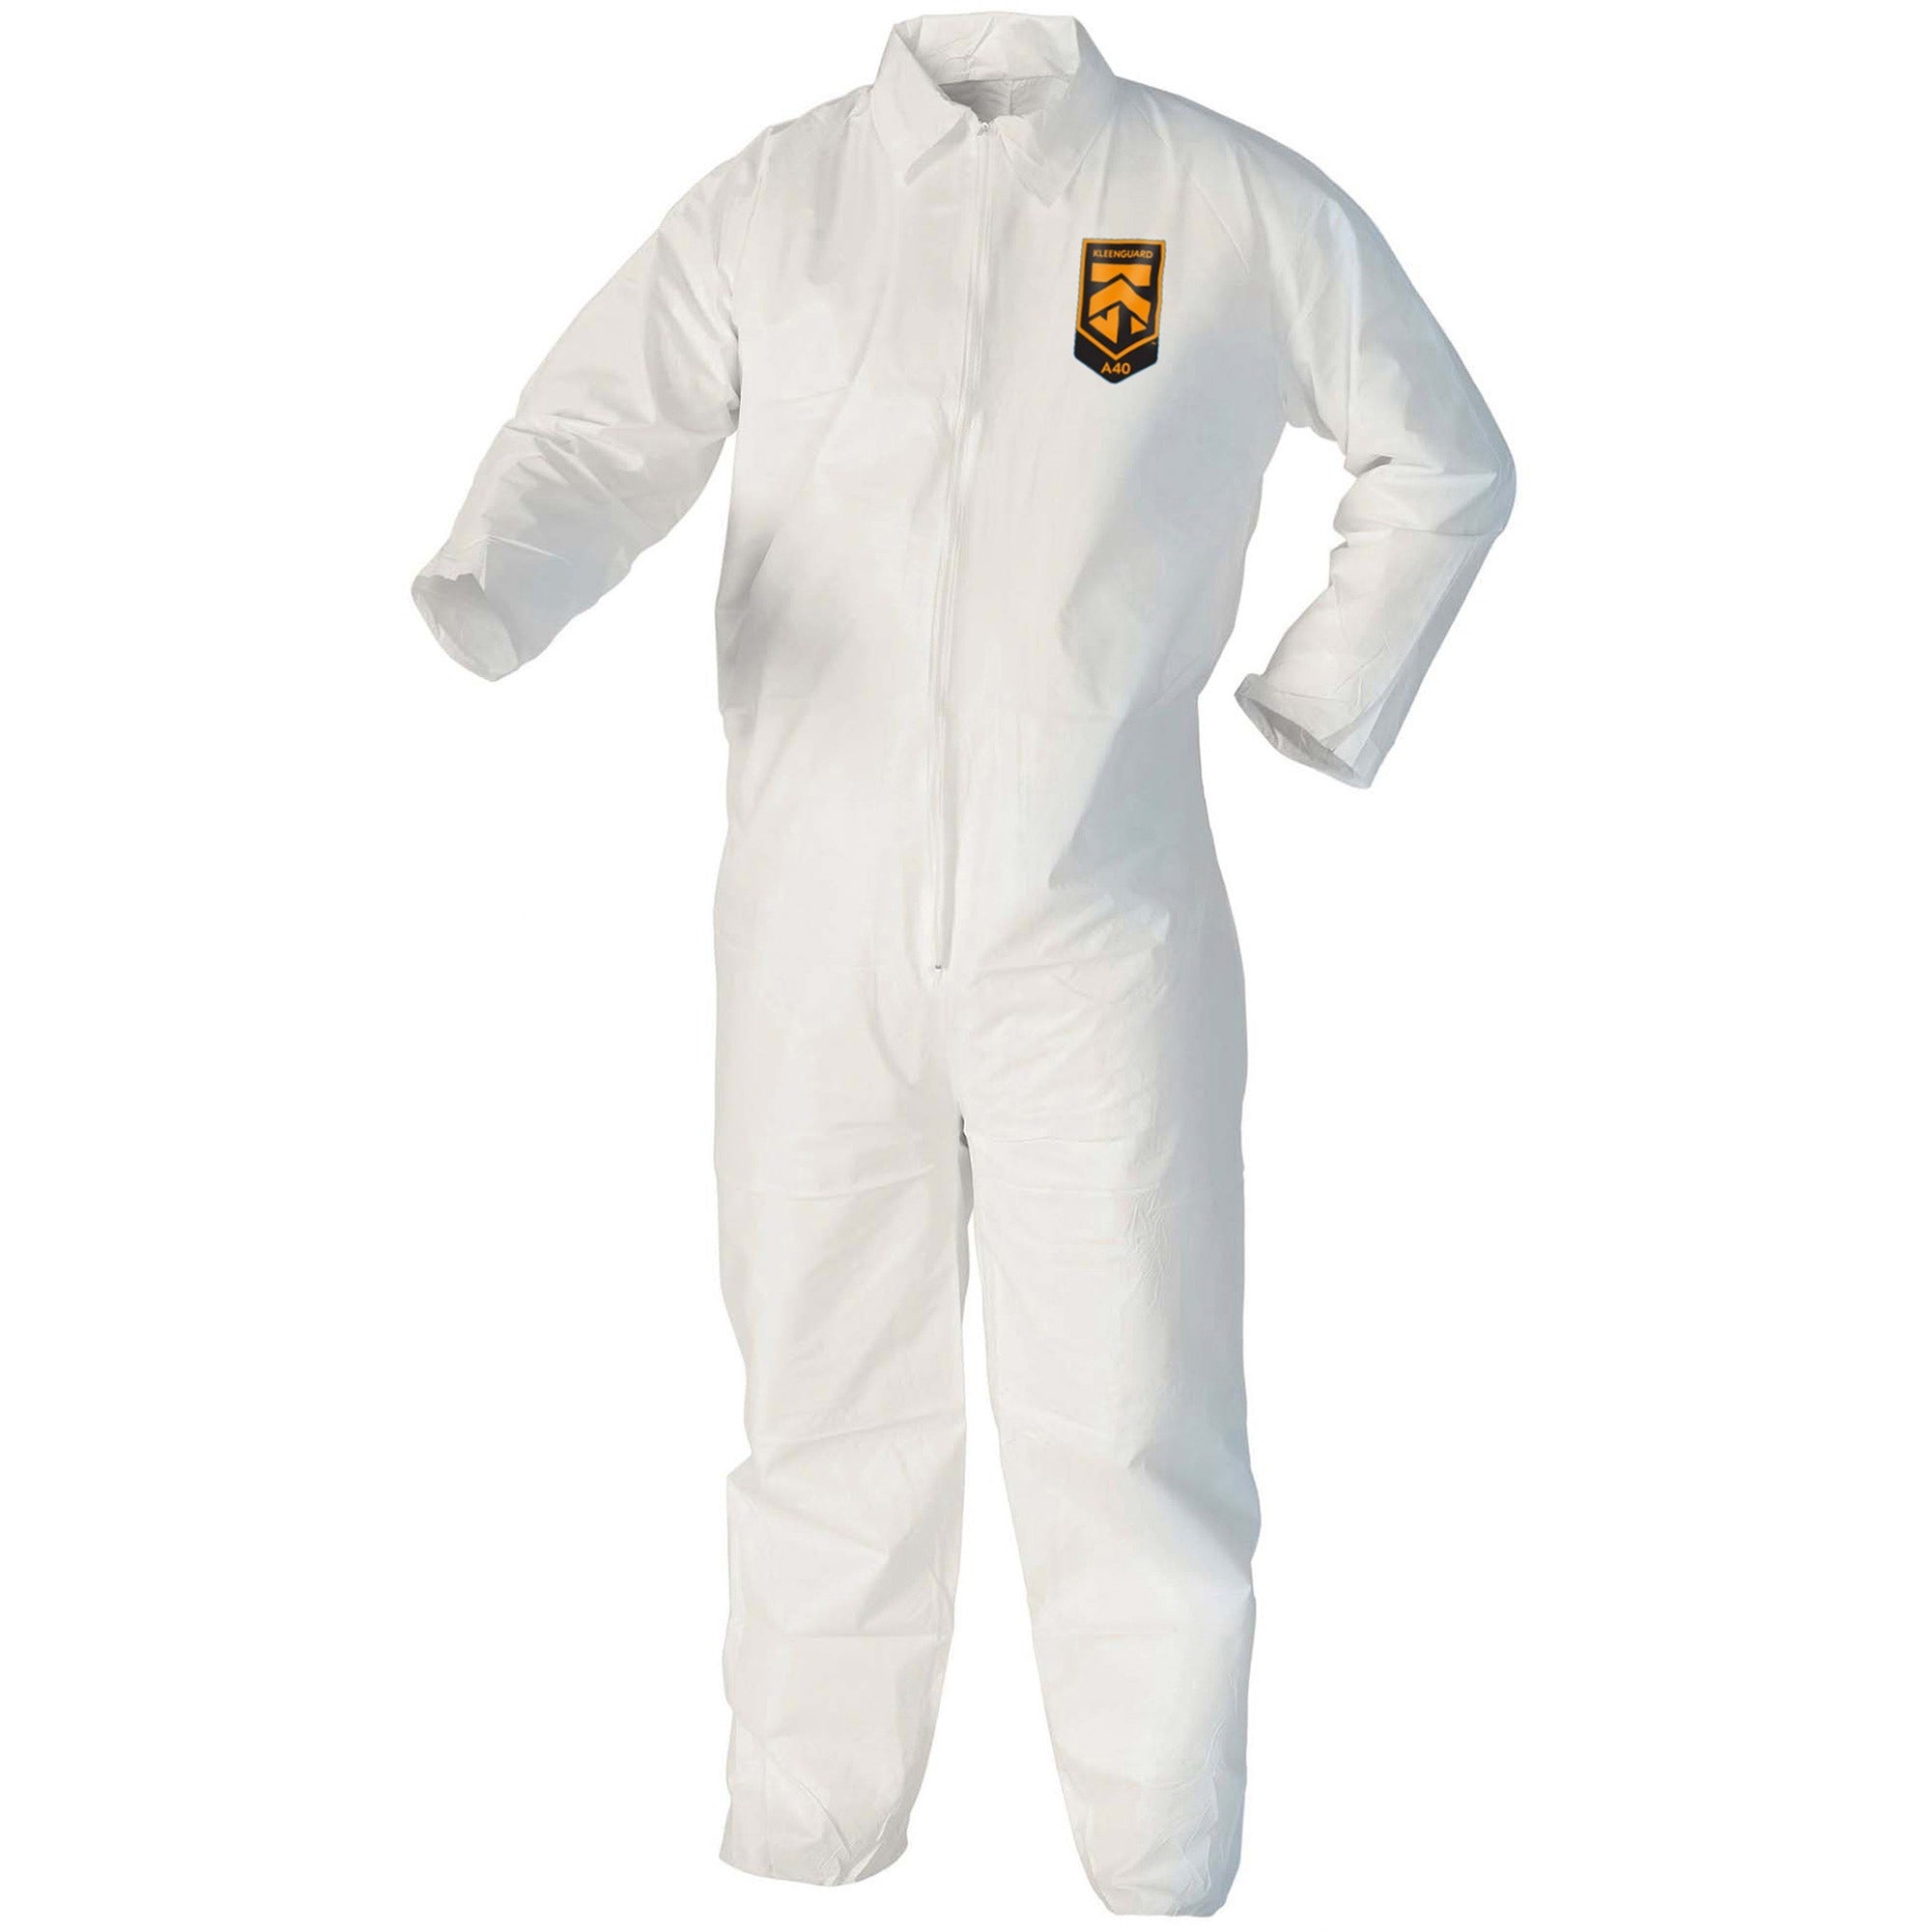 kleenguard-a40-coveralls-zipper-front-2-xtra-large-size-liquid-flying-particle-protection-white-comfortable-zipper-front-breathable-25-carton_kcc44305 - 1